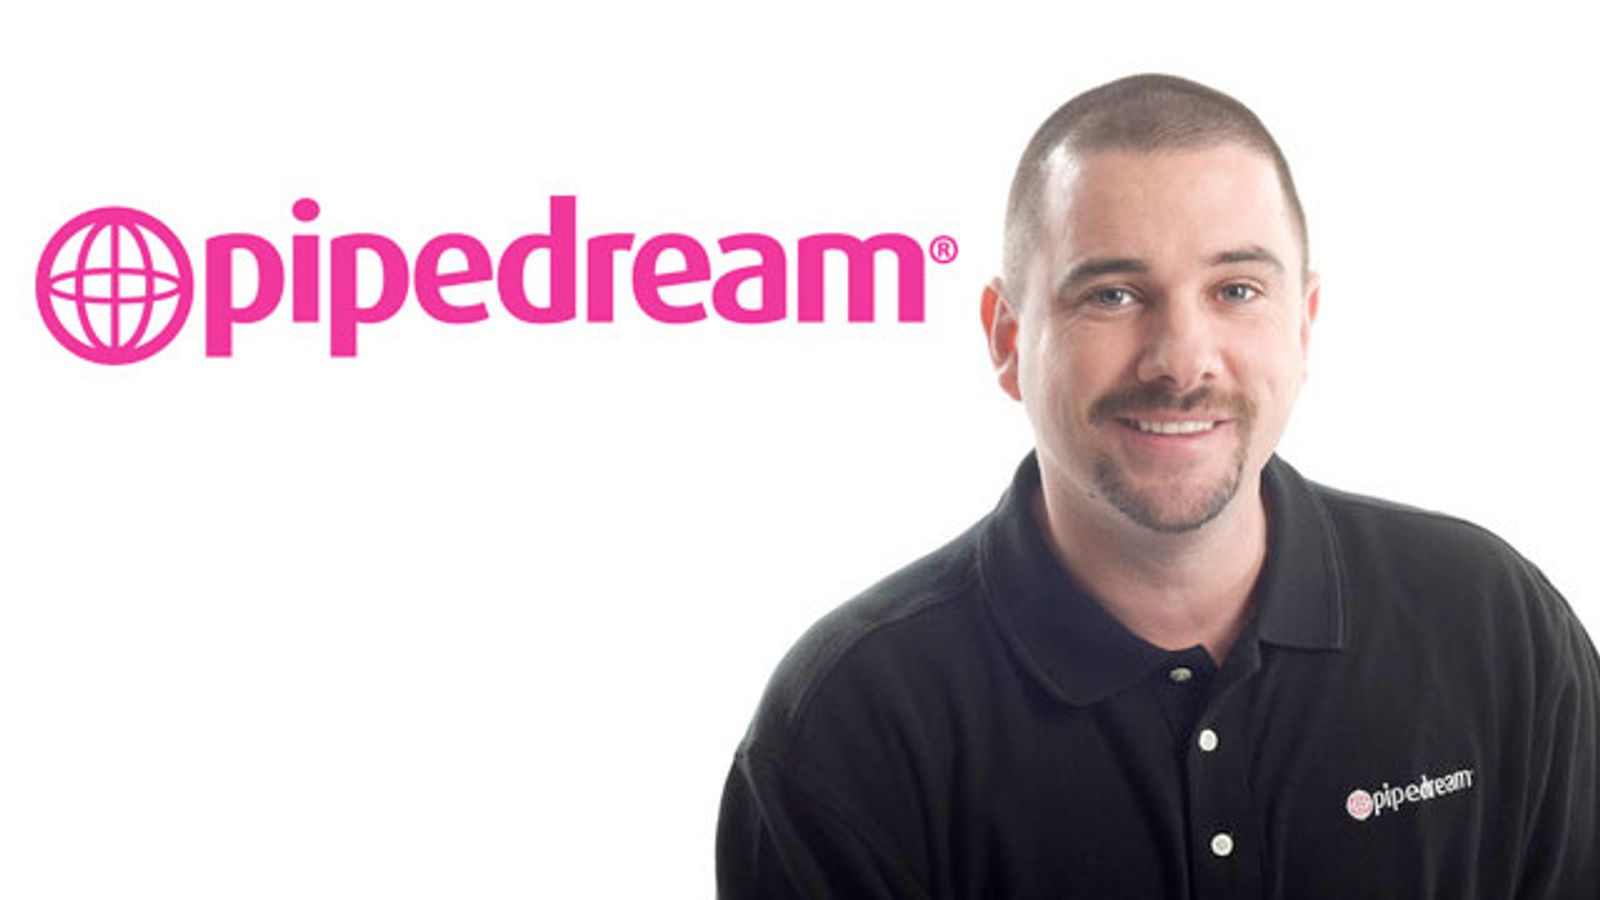 Pipedream Welcomes Chris Armstrong to Sales 'Dream Team'